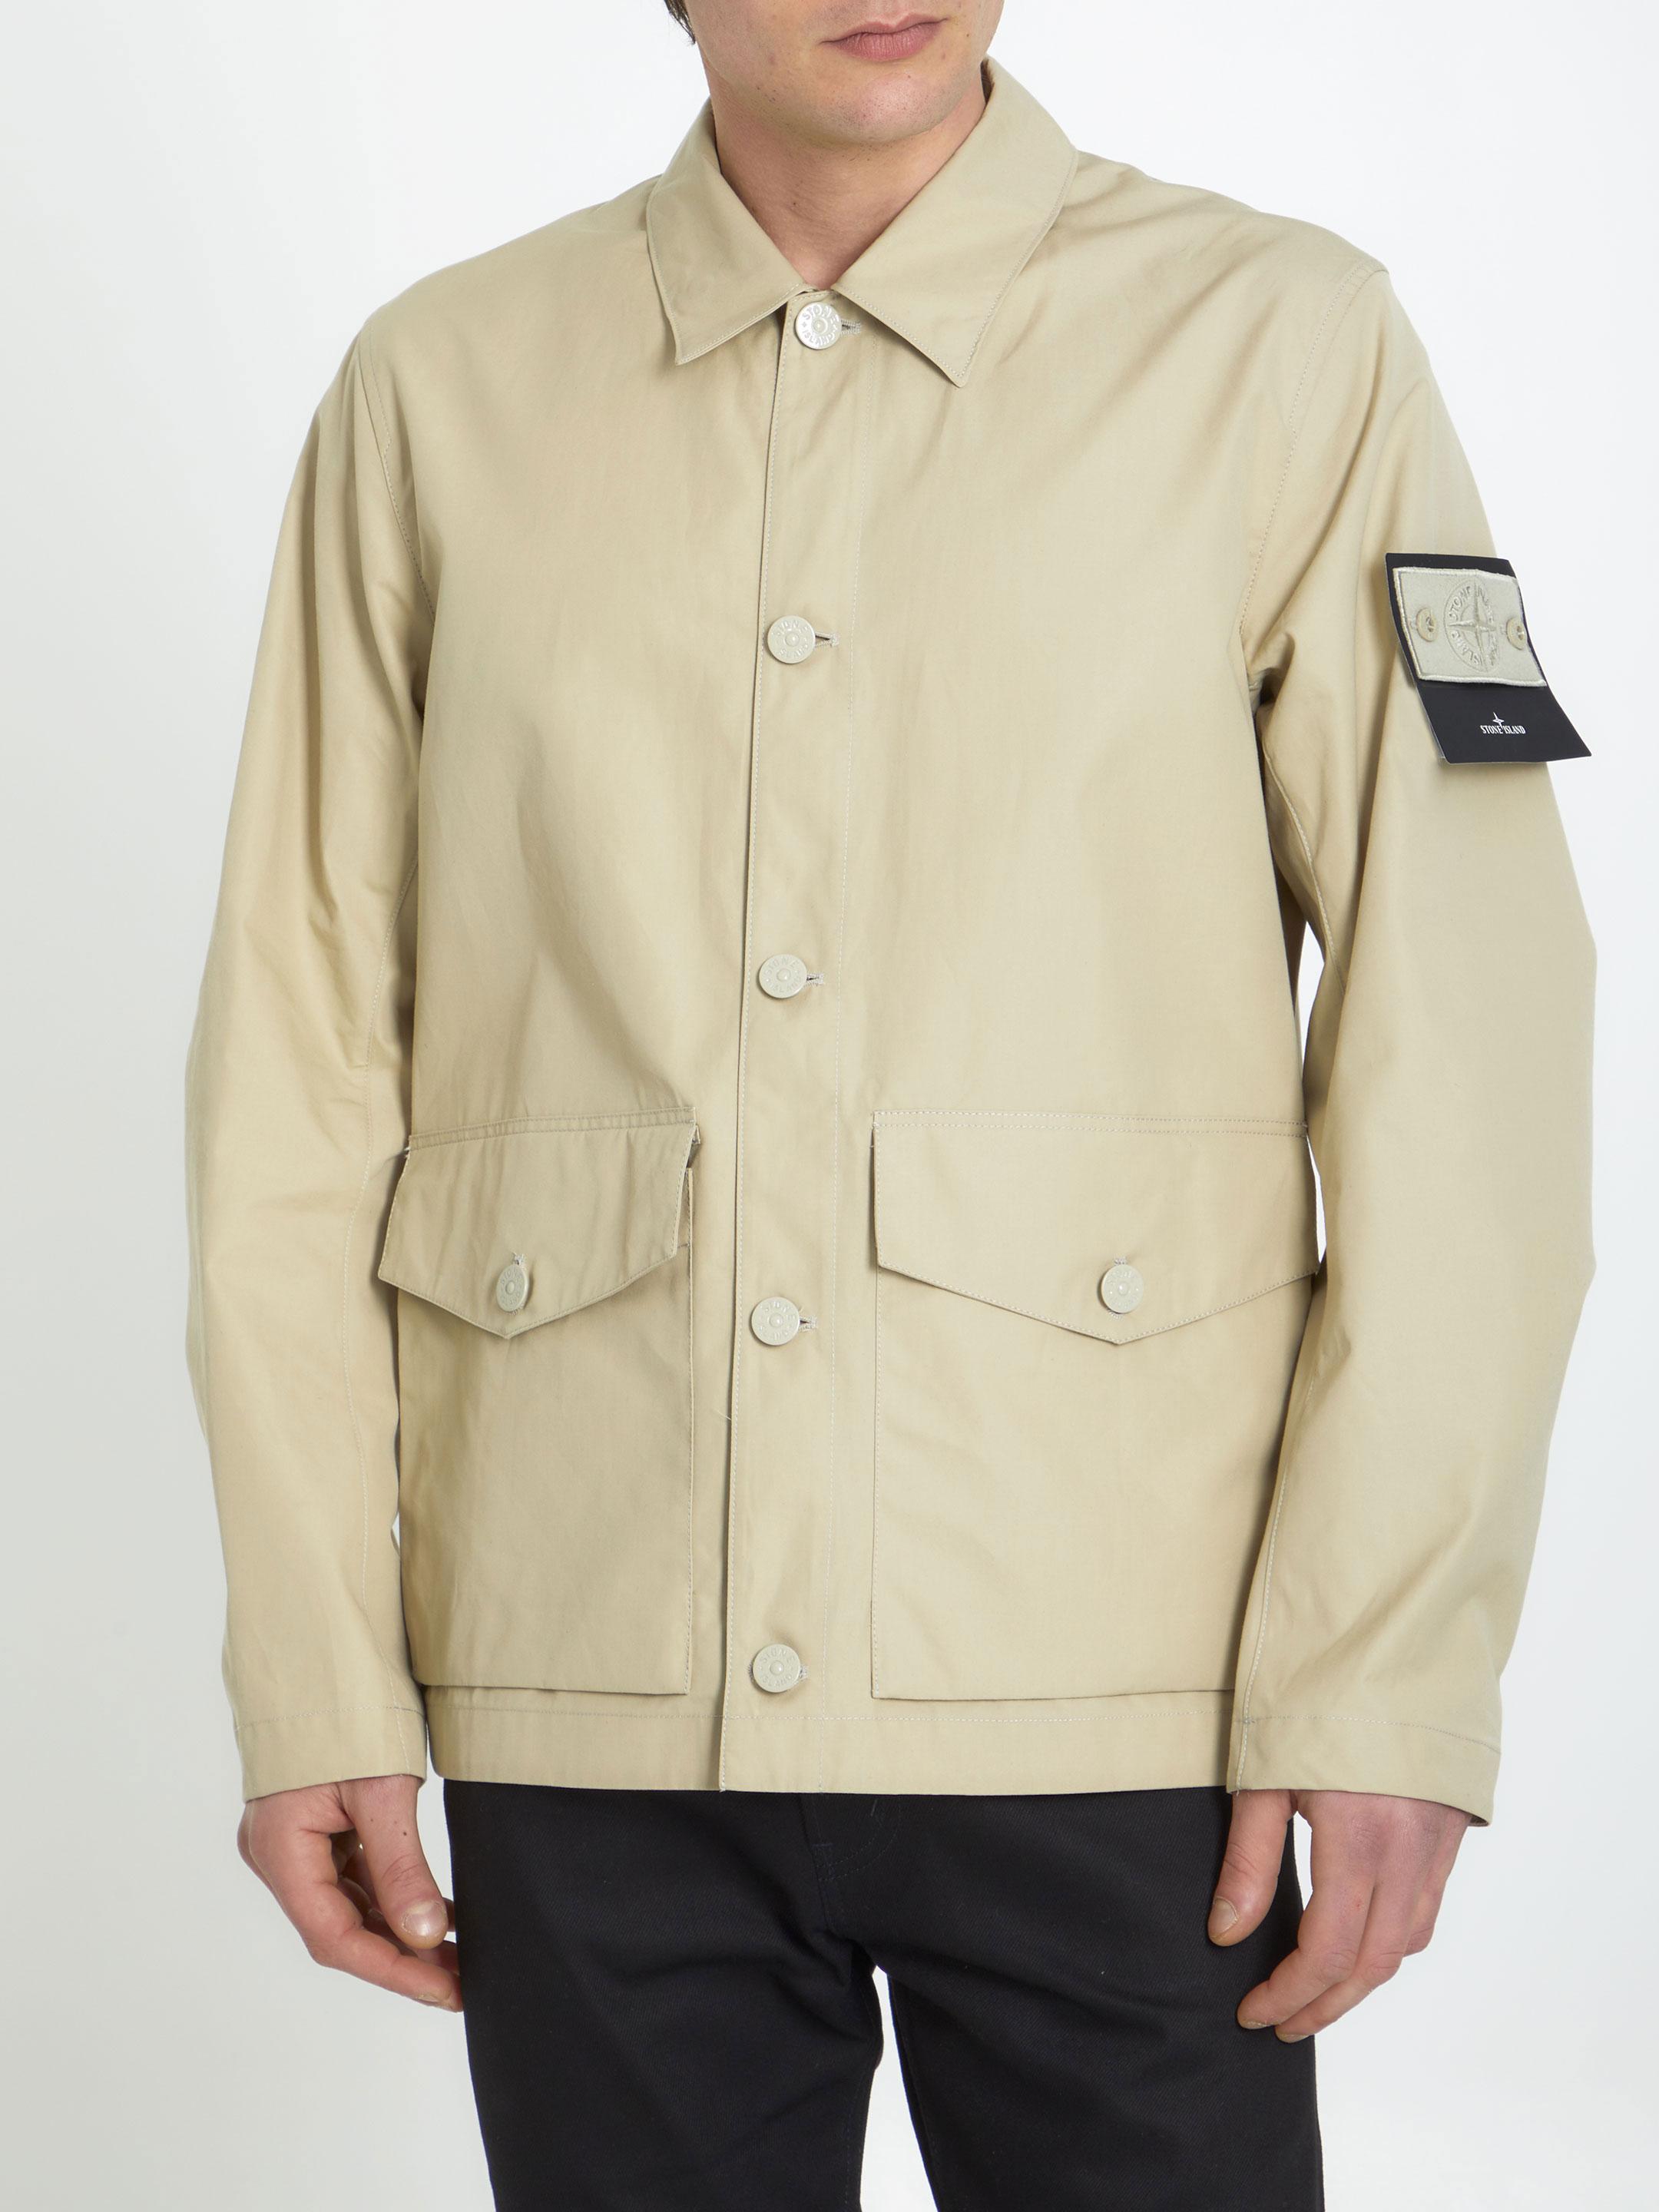 Stone Island Ghost Piece O-ventile Jacket in Natural for Men | Lyst